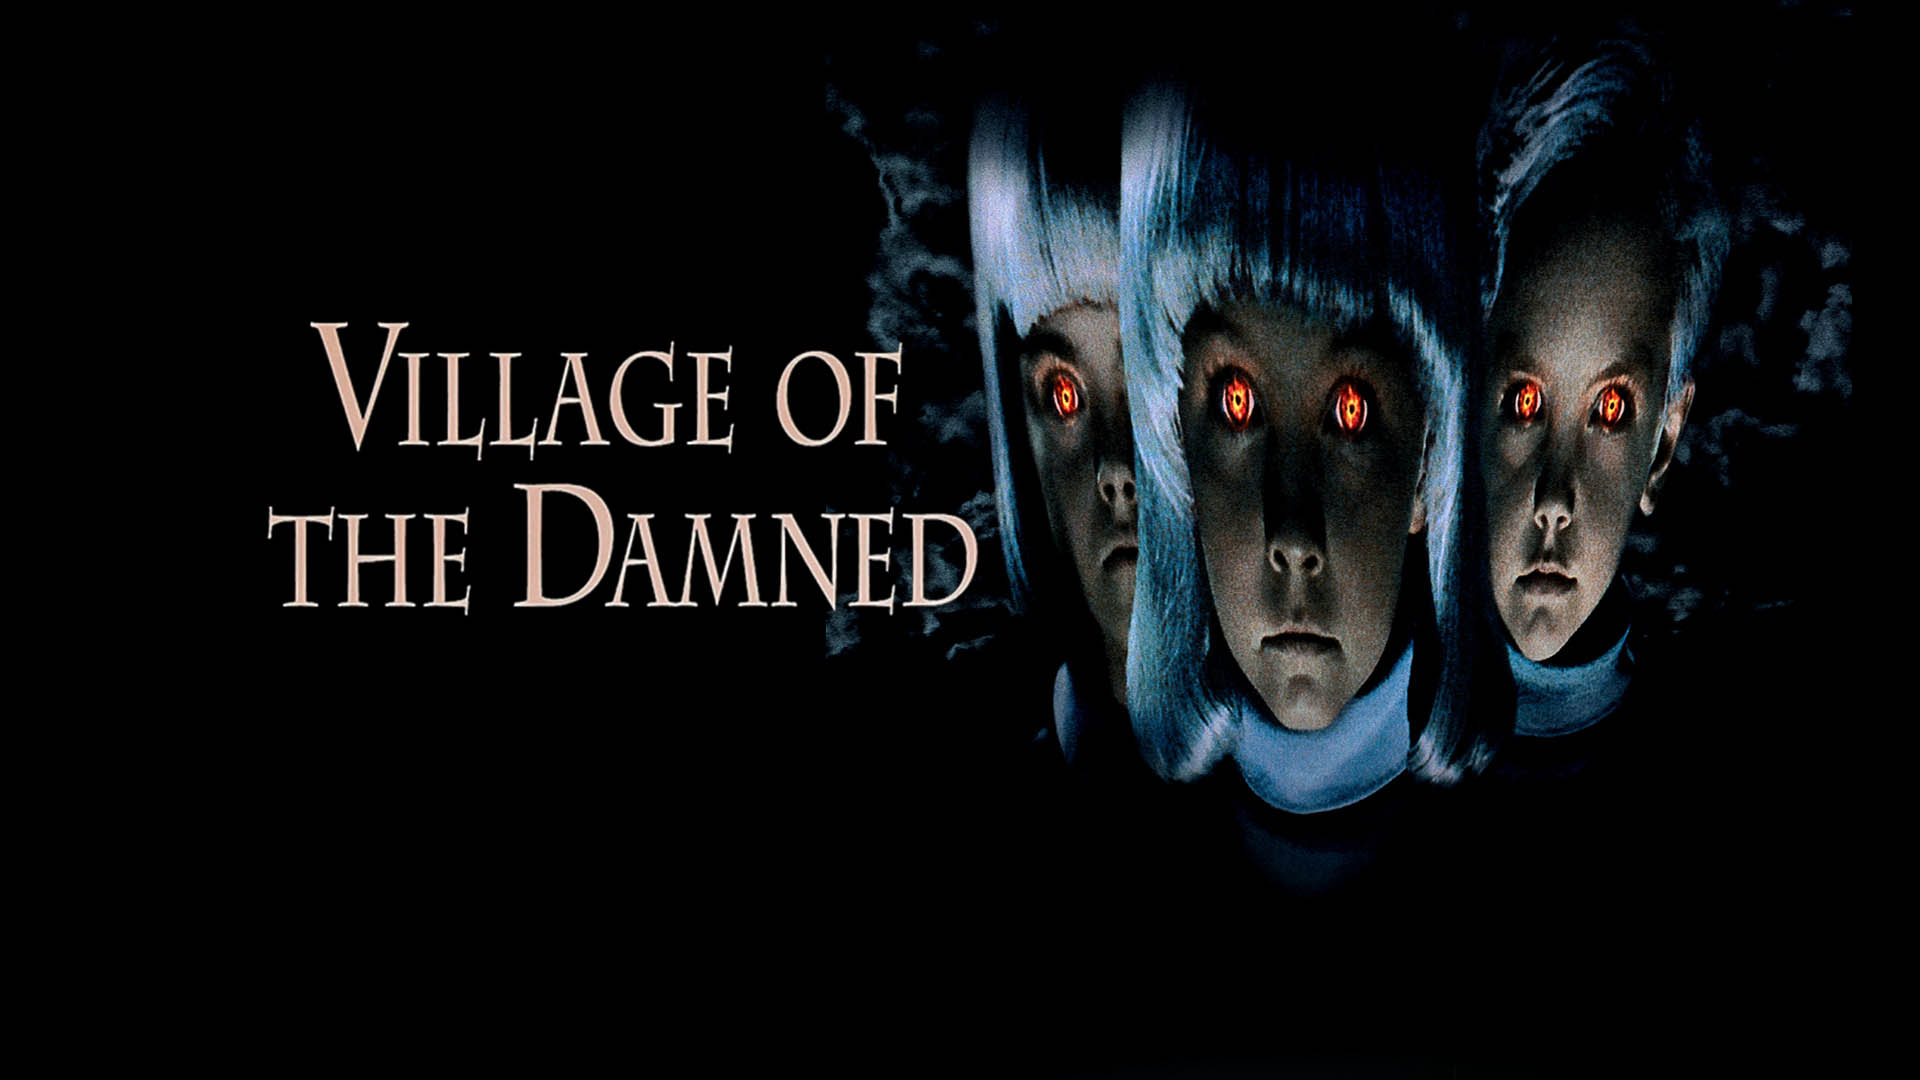 Watch Village of the Damned Online | Stream Full Movies